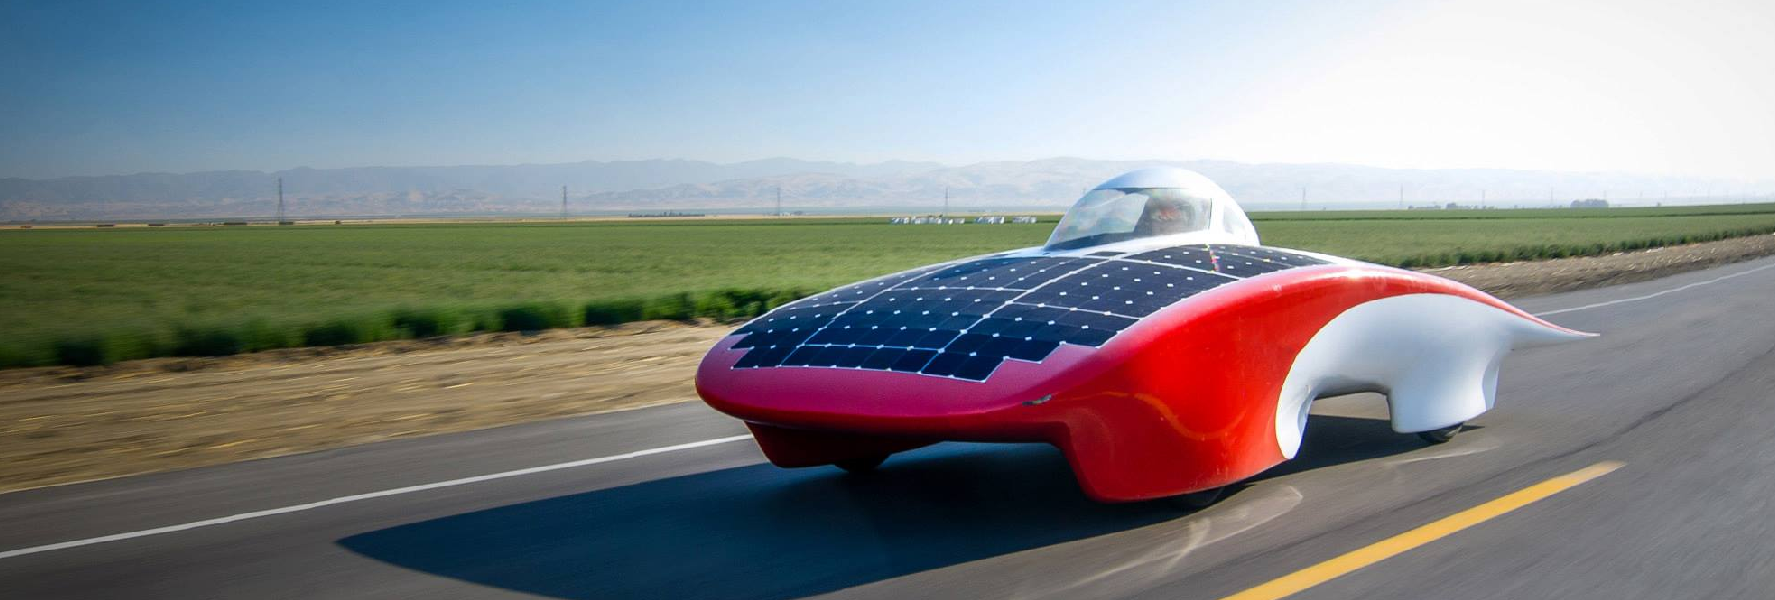 Solarpowered cars could they play a role in the future? OpenMind